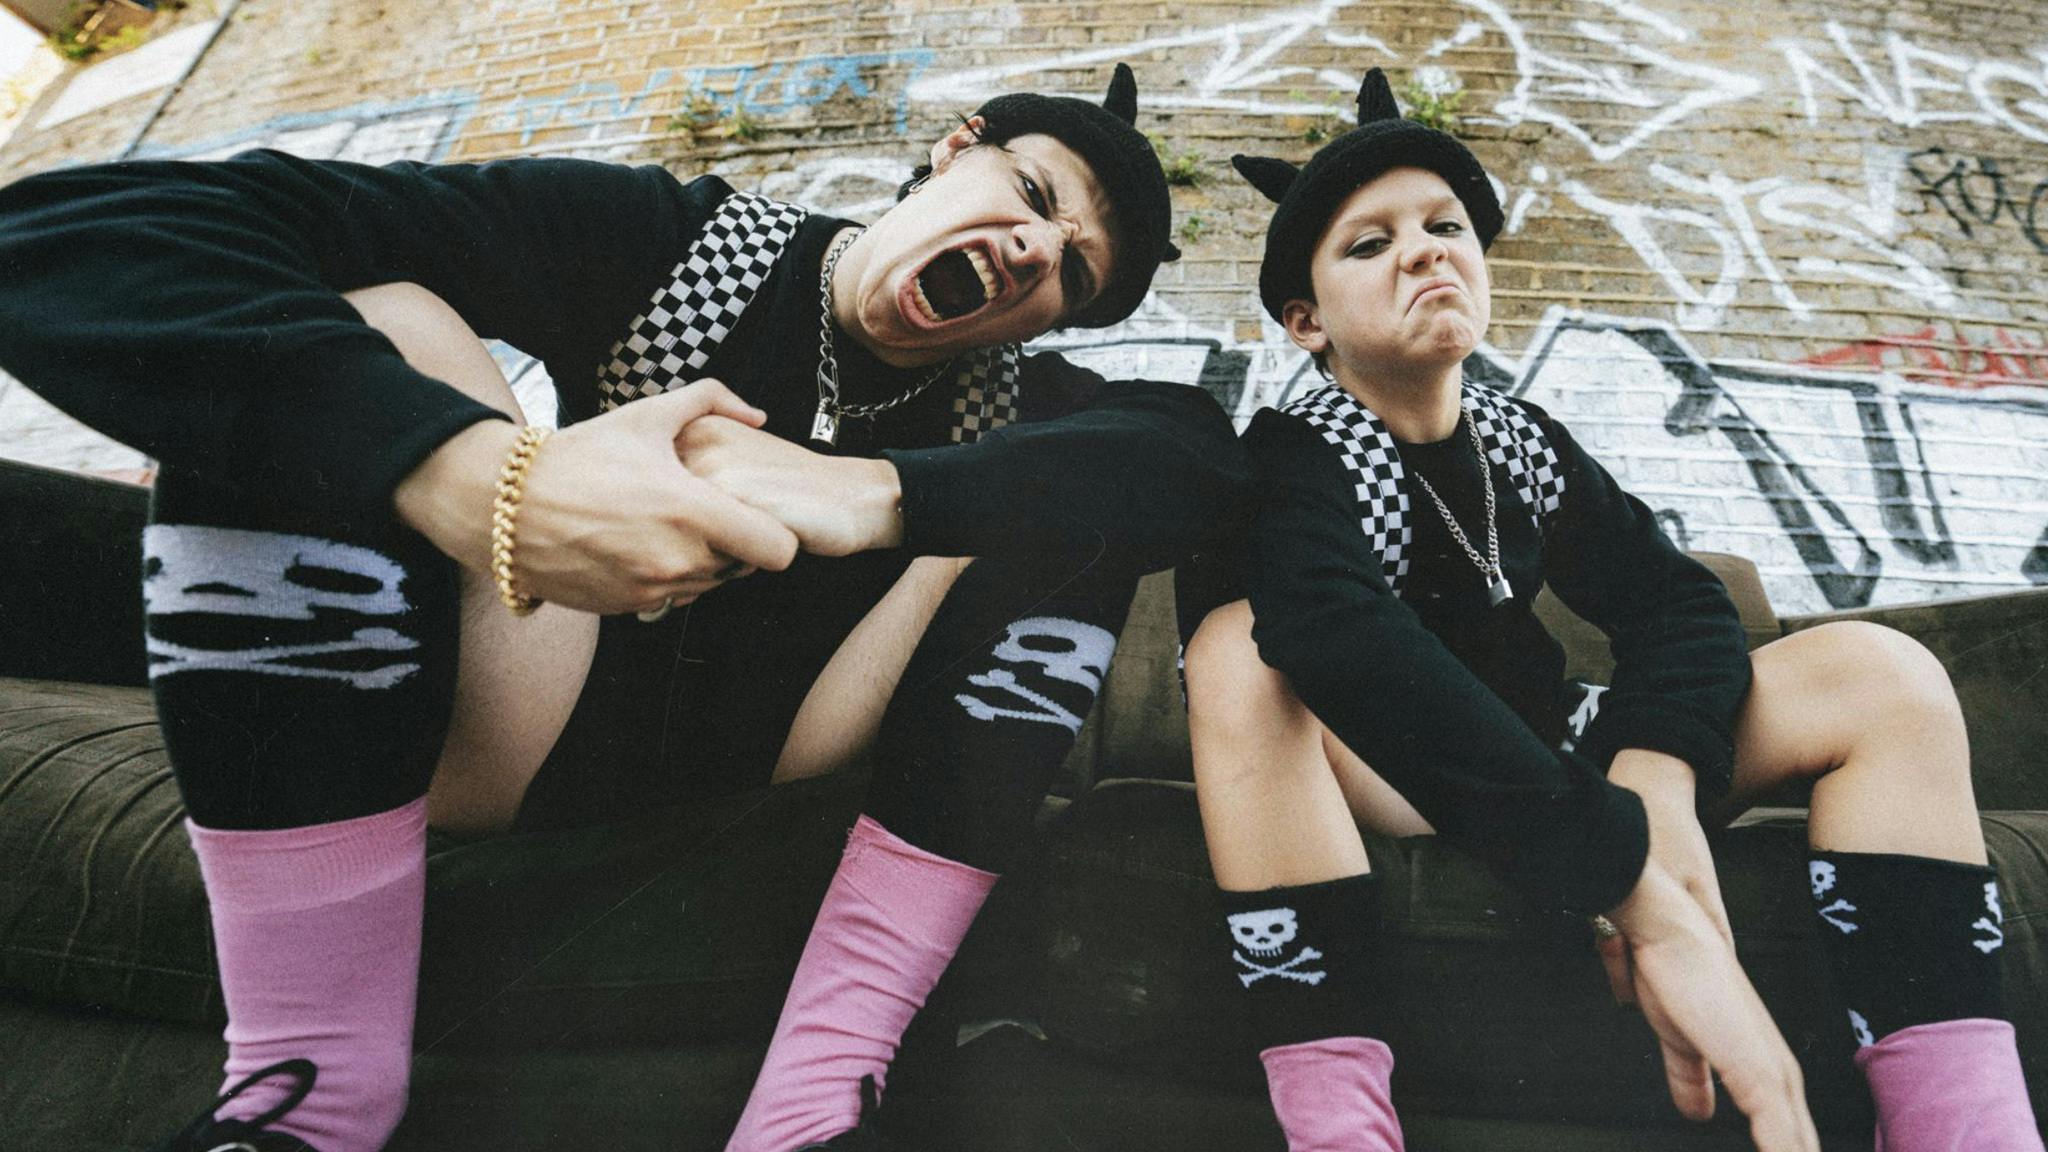 “I wanted it to look like emo Shameless or St. Trinian’s on acid”: YUNGBLUD releases Lowlife video